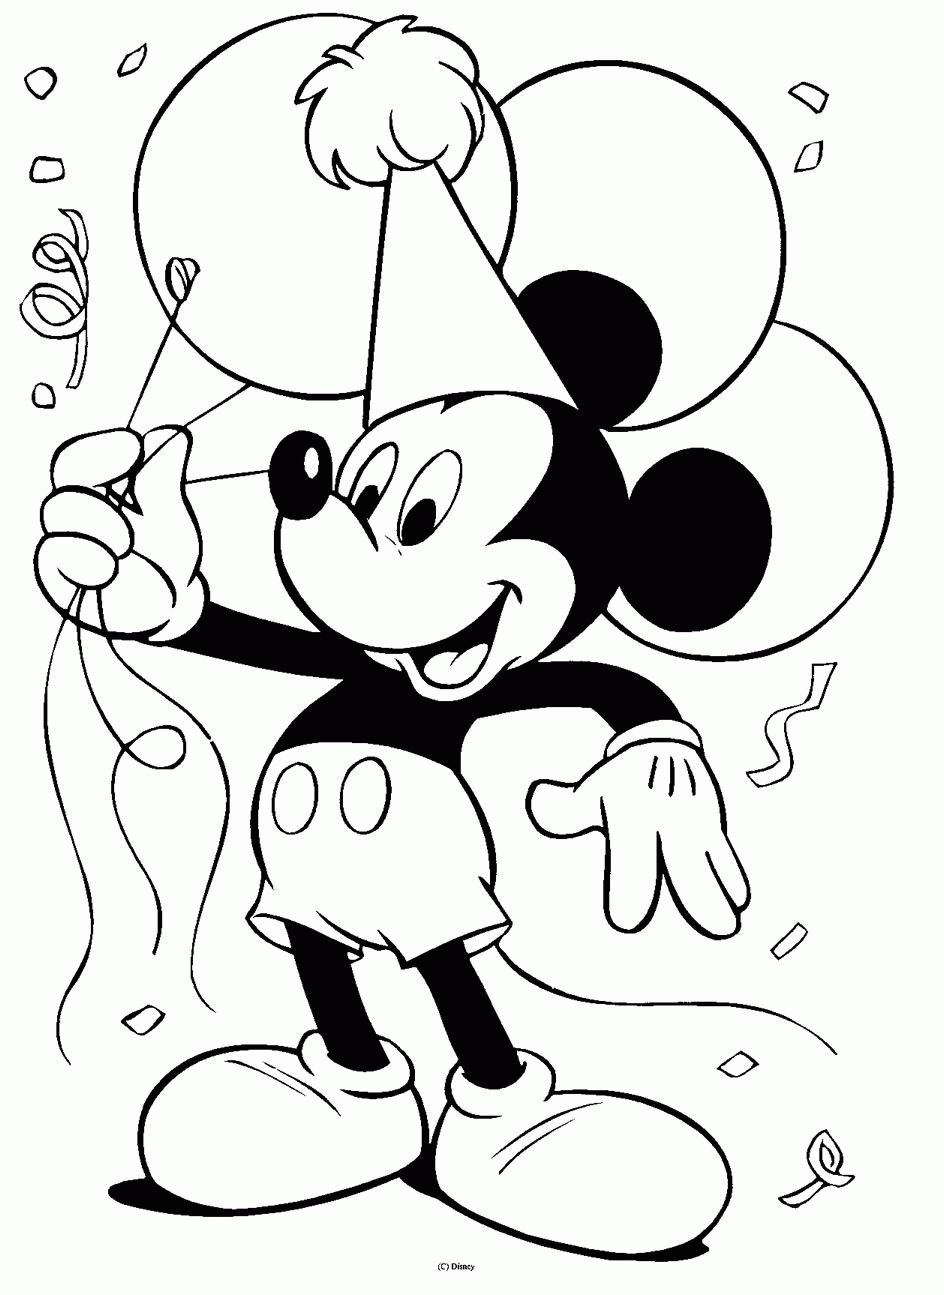 mickey mouse coloring page free mickey mouse coloring pages for kids gtgt disney mickey mouse coloring page 